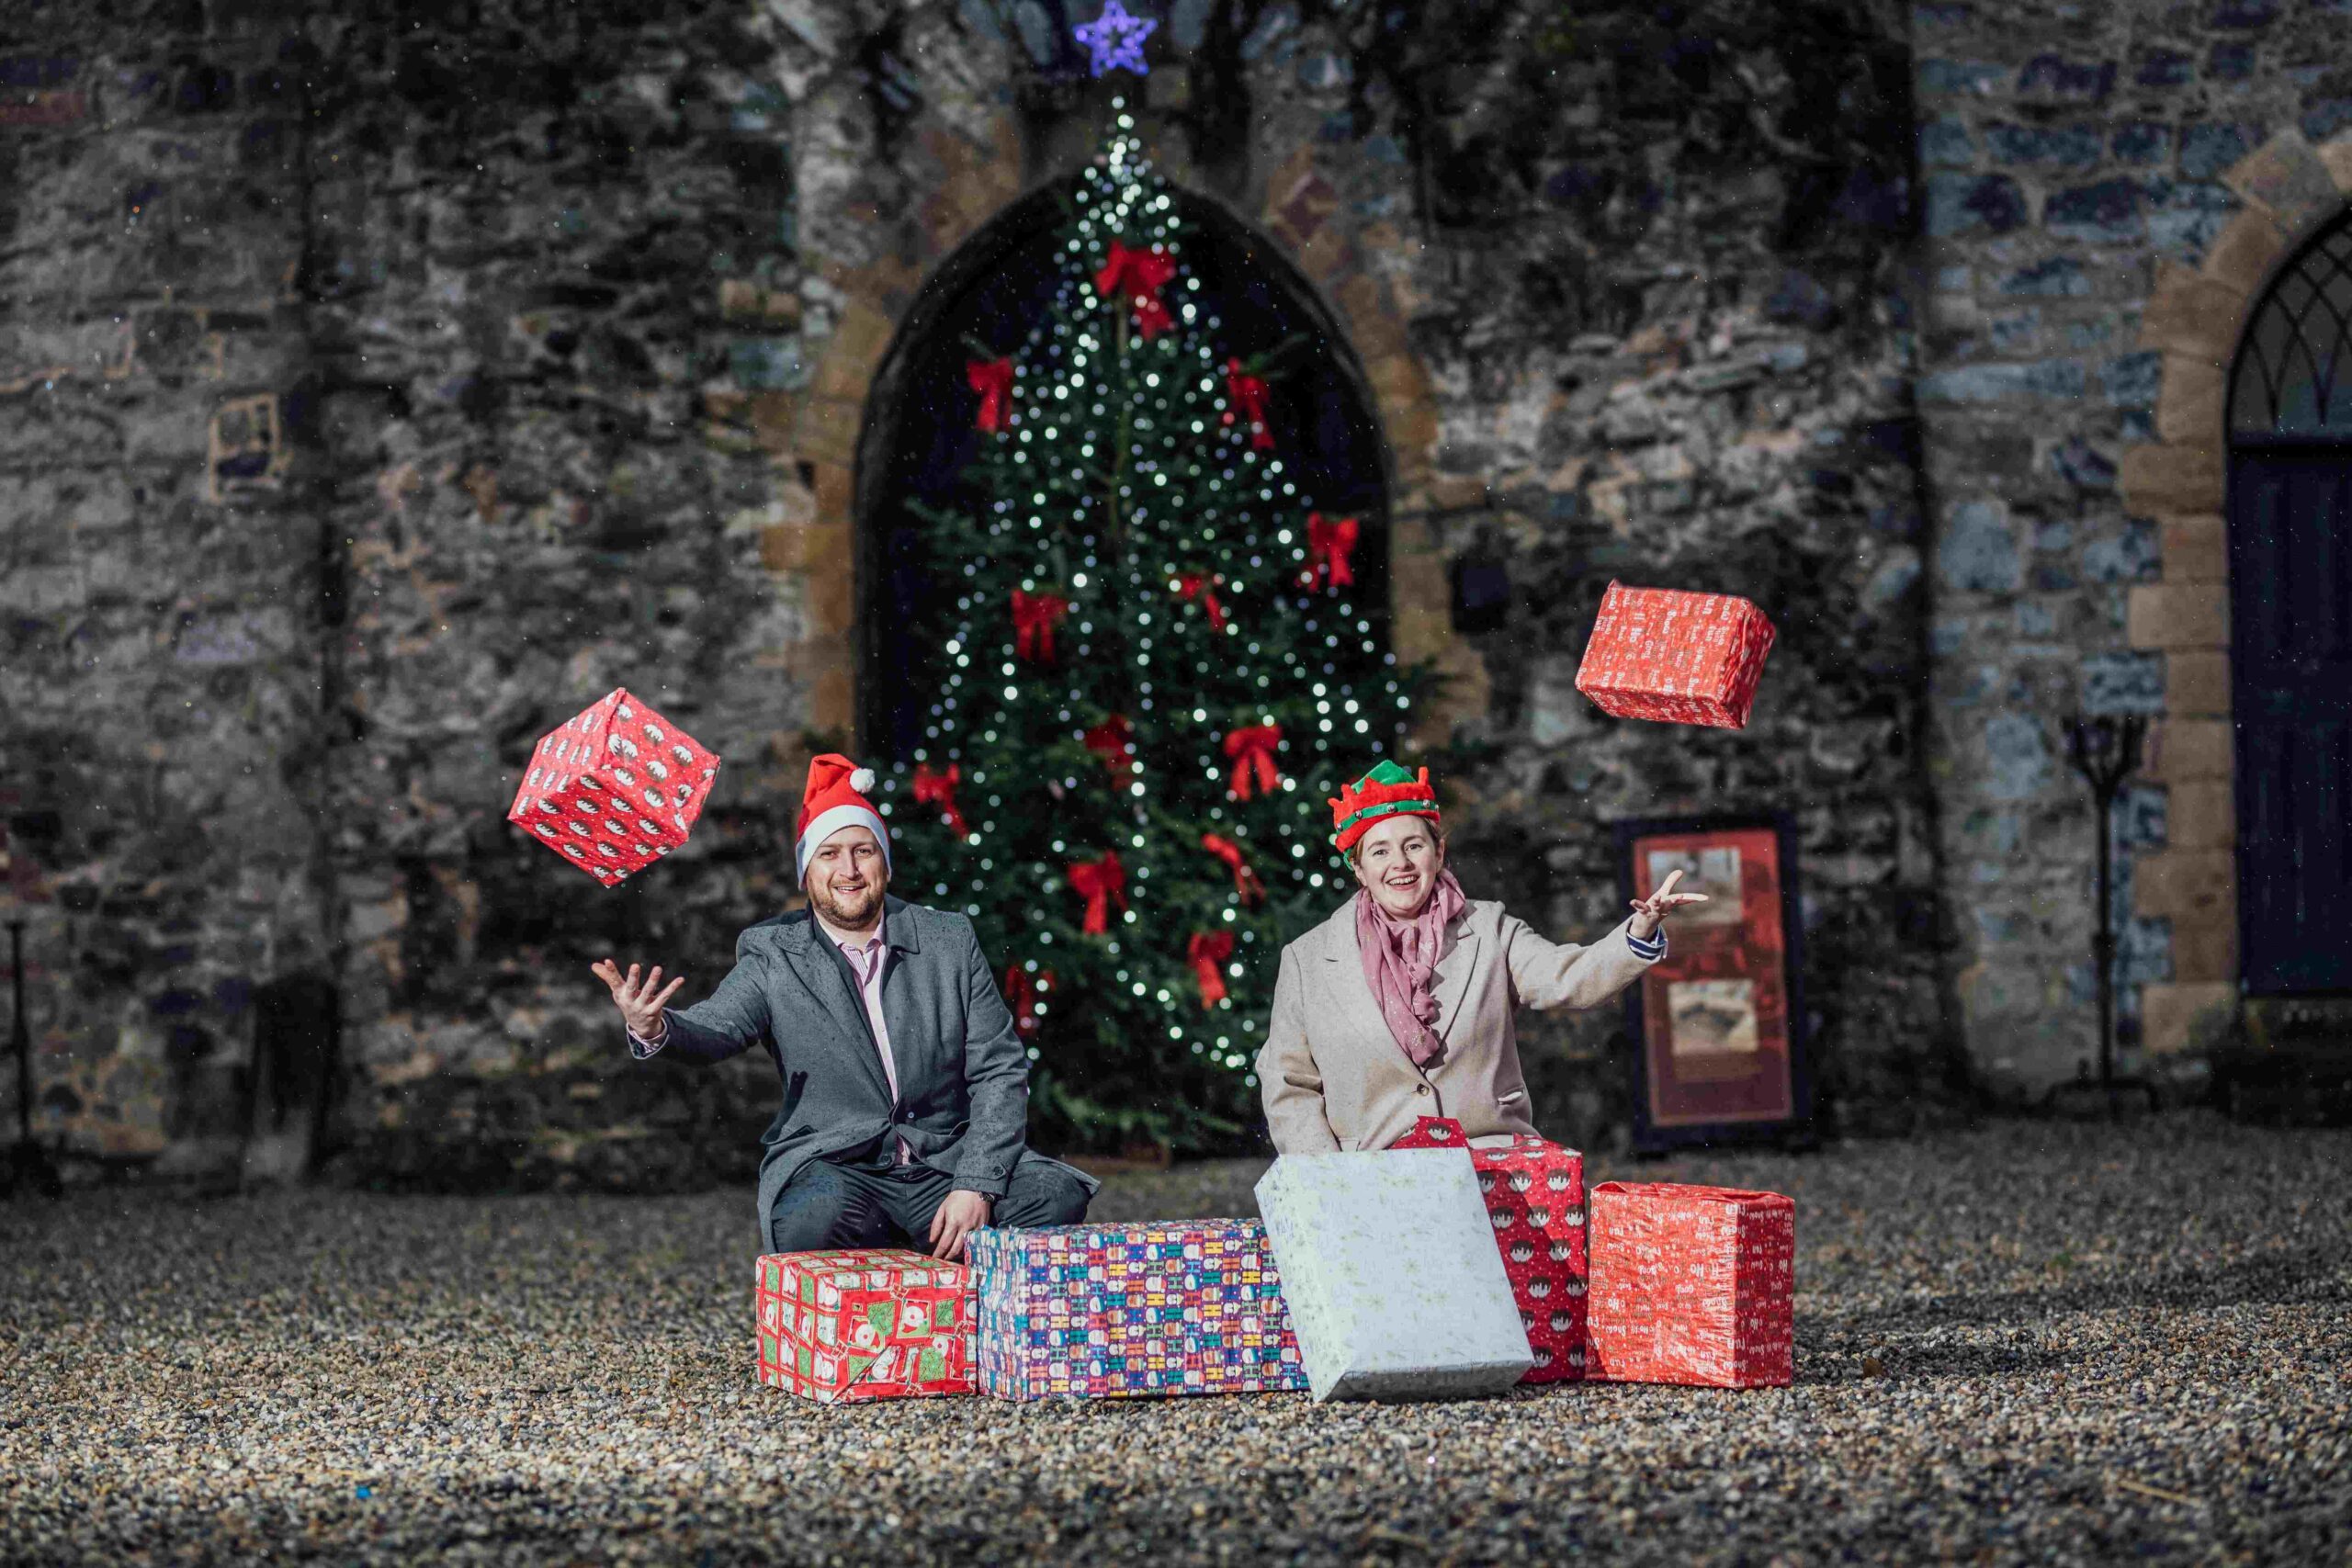 UHL Christmas toy appeal - Daire Heffernan, General Manager, King John's Castle, Limerick is pictured with Orlaith McMahon, Play Specialist Children's Arc University Hospital Limerick (UHL) at the Castle to launch the Christmas Toy Appeal in aid of the Children’s Arc UHL. Picture: Brian Arthur